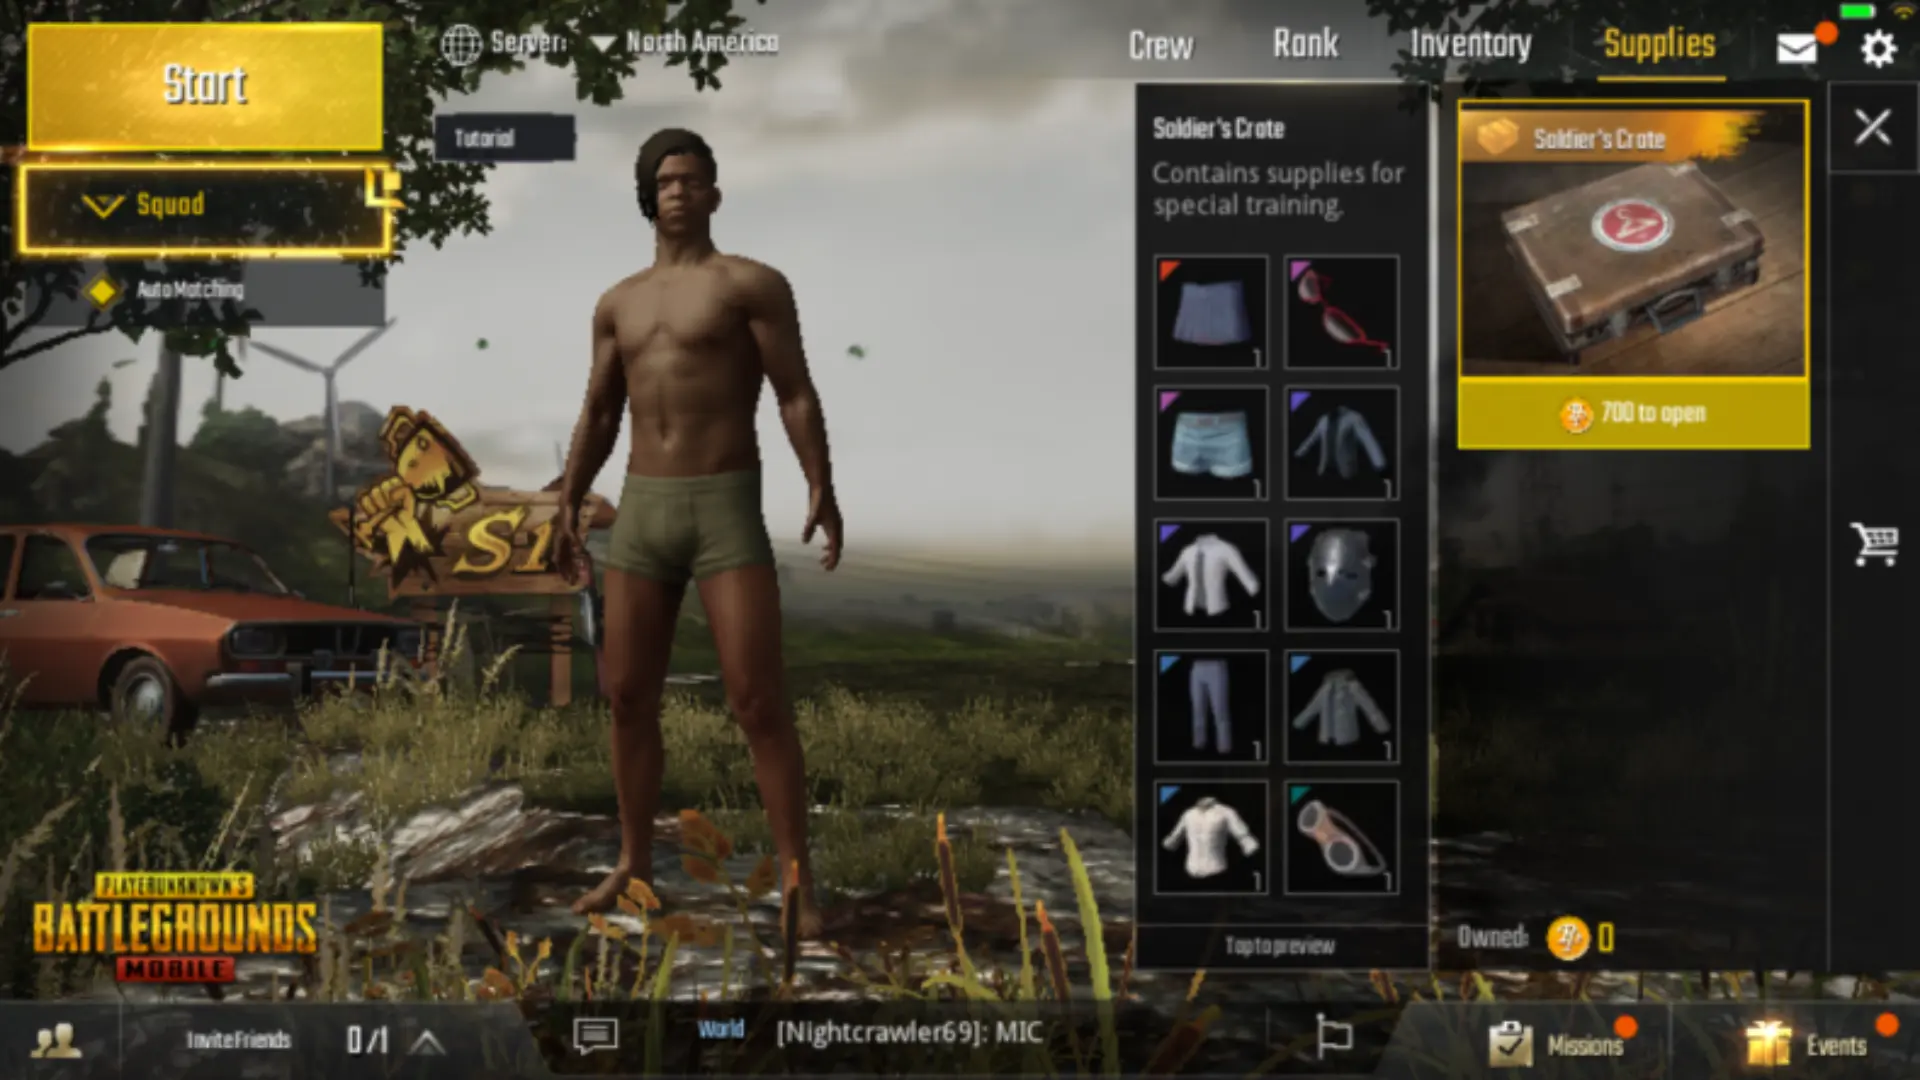 Grabbing Clothes by Purchasing Crates